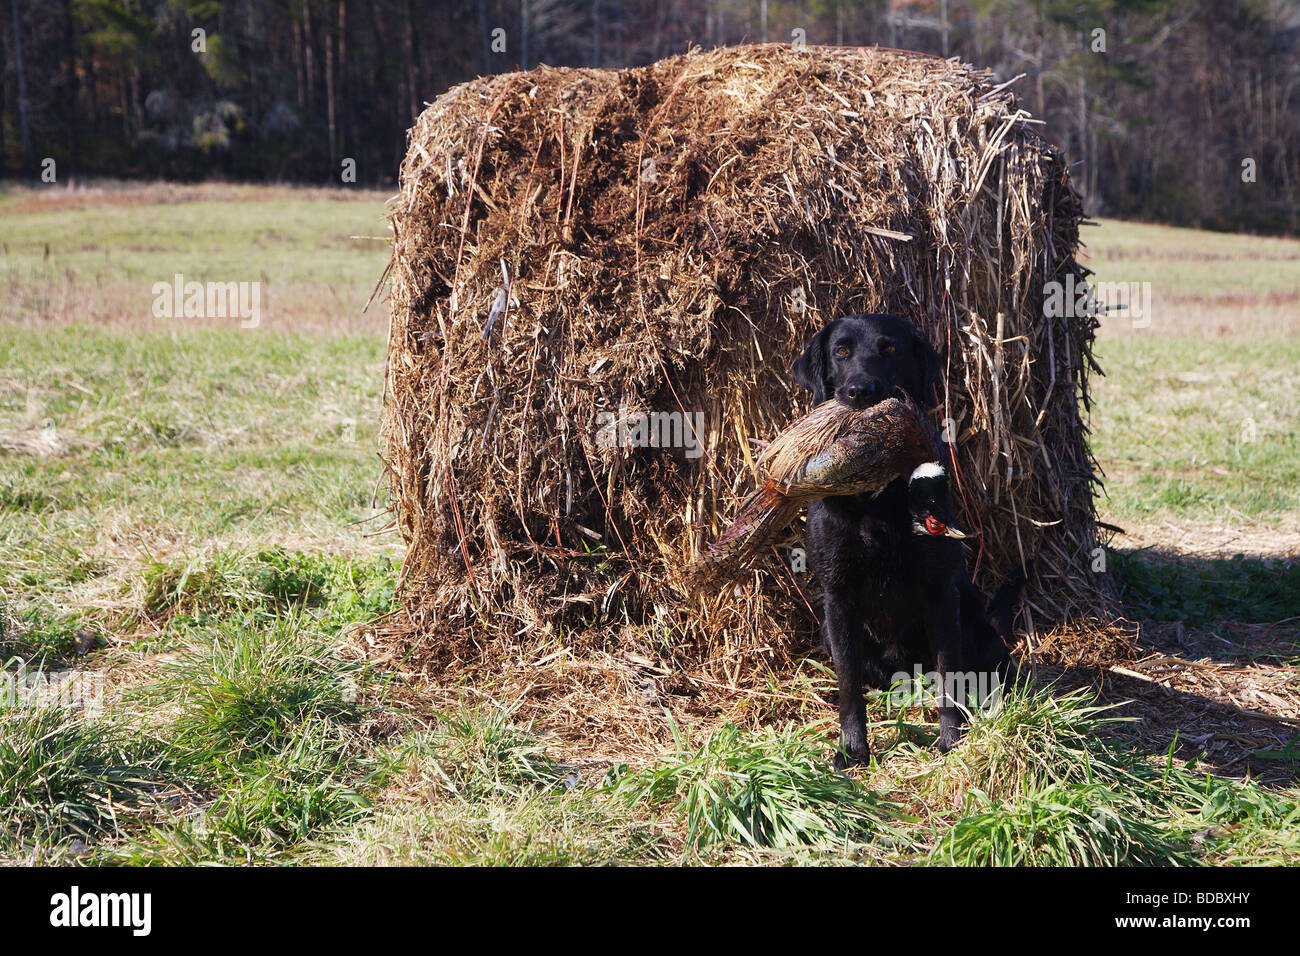 PORTRAIT BLACK LAB LABRADOR HOLDING PHEASANT IN MOUTH IN FRONT OF LARGE HAY BALE Stock Photo